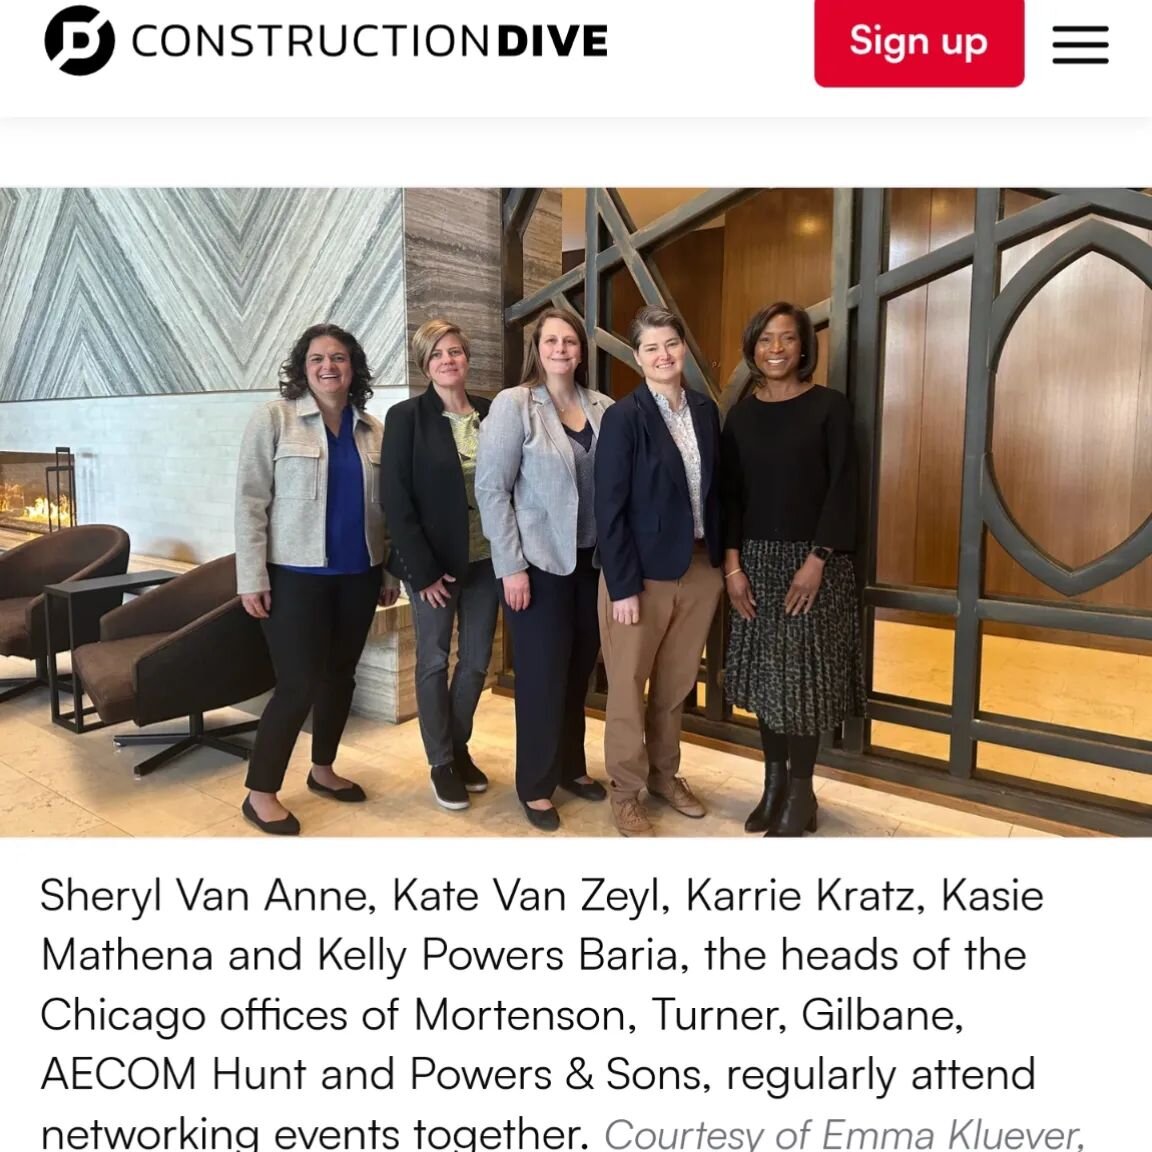 Women are moving up in the construction world!📈
.
&quot;Meet 5 Women leading major construction firms in Chicago!&quot; ~&nbsp;Joe R Bousquin,&nbsp;Construction Dive
.
Christi&nbsp;&amp;&nbsp;Angela&nbsp;love what each woman shares, here are some hi